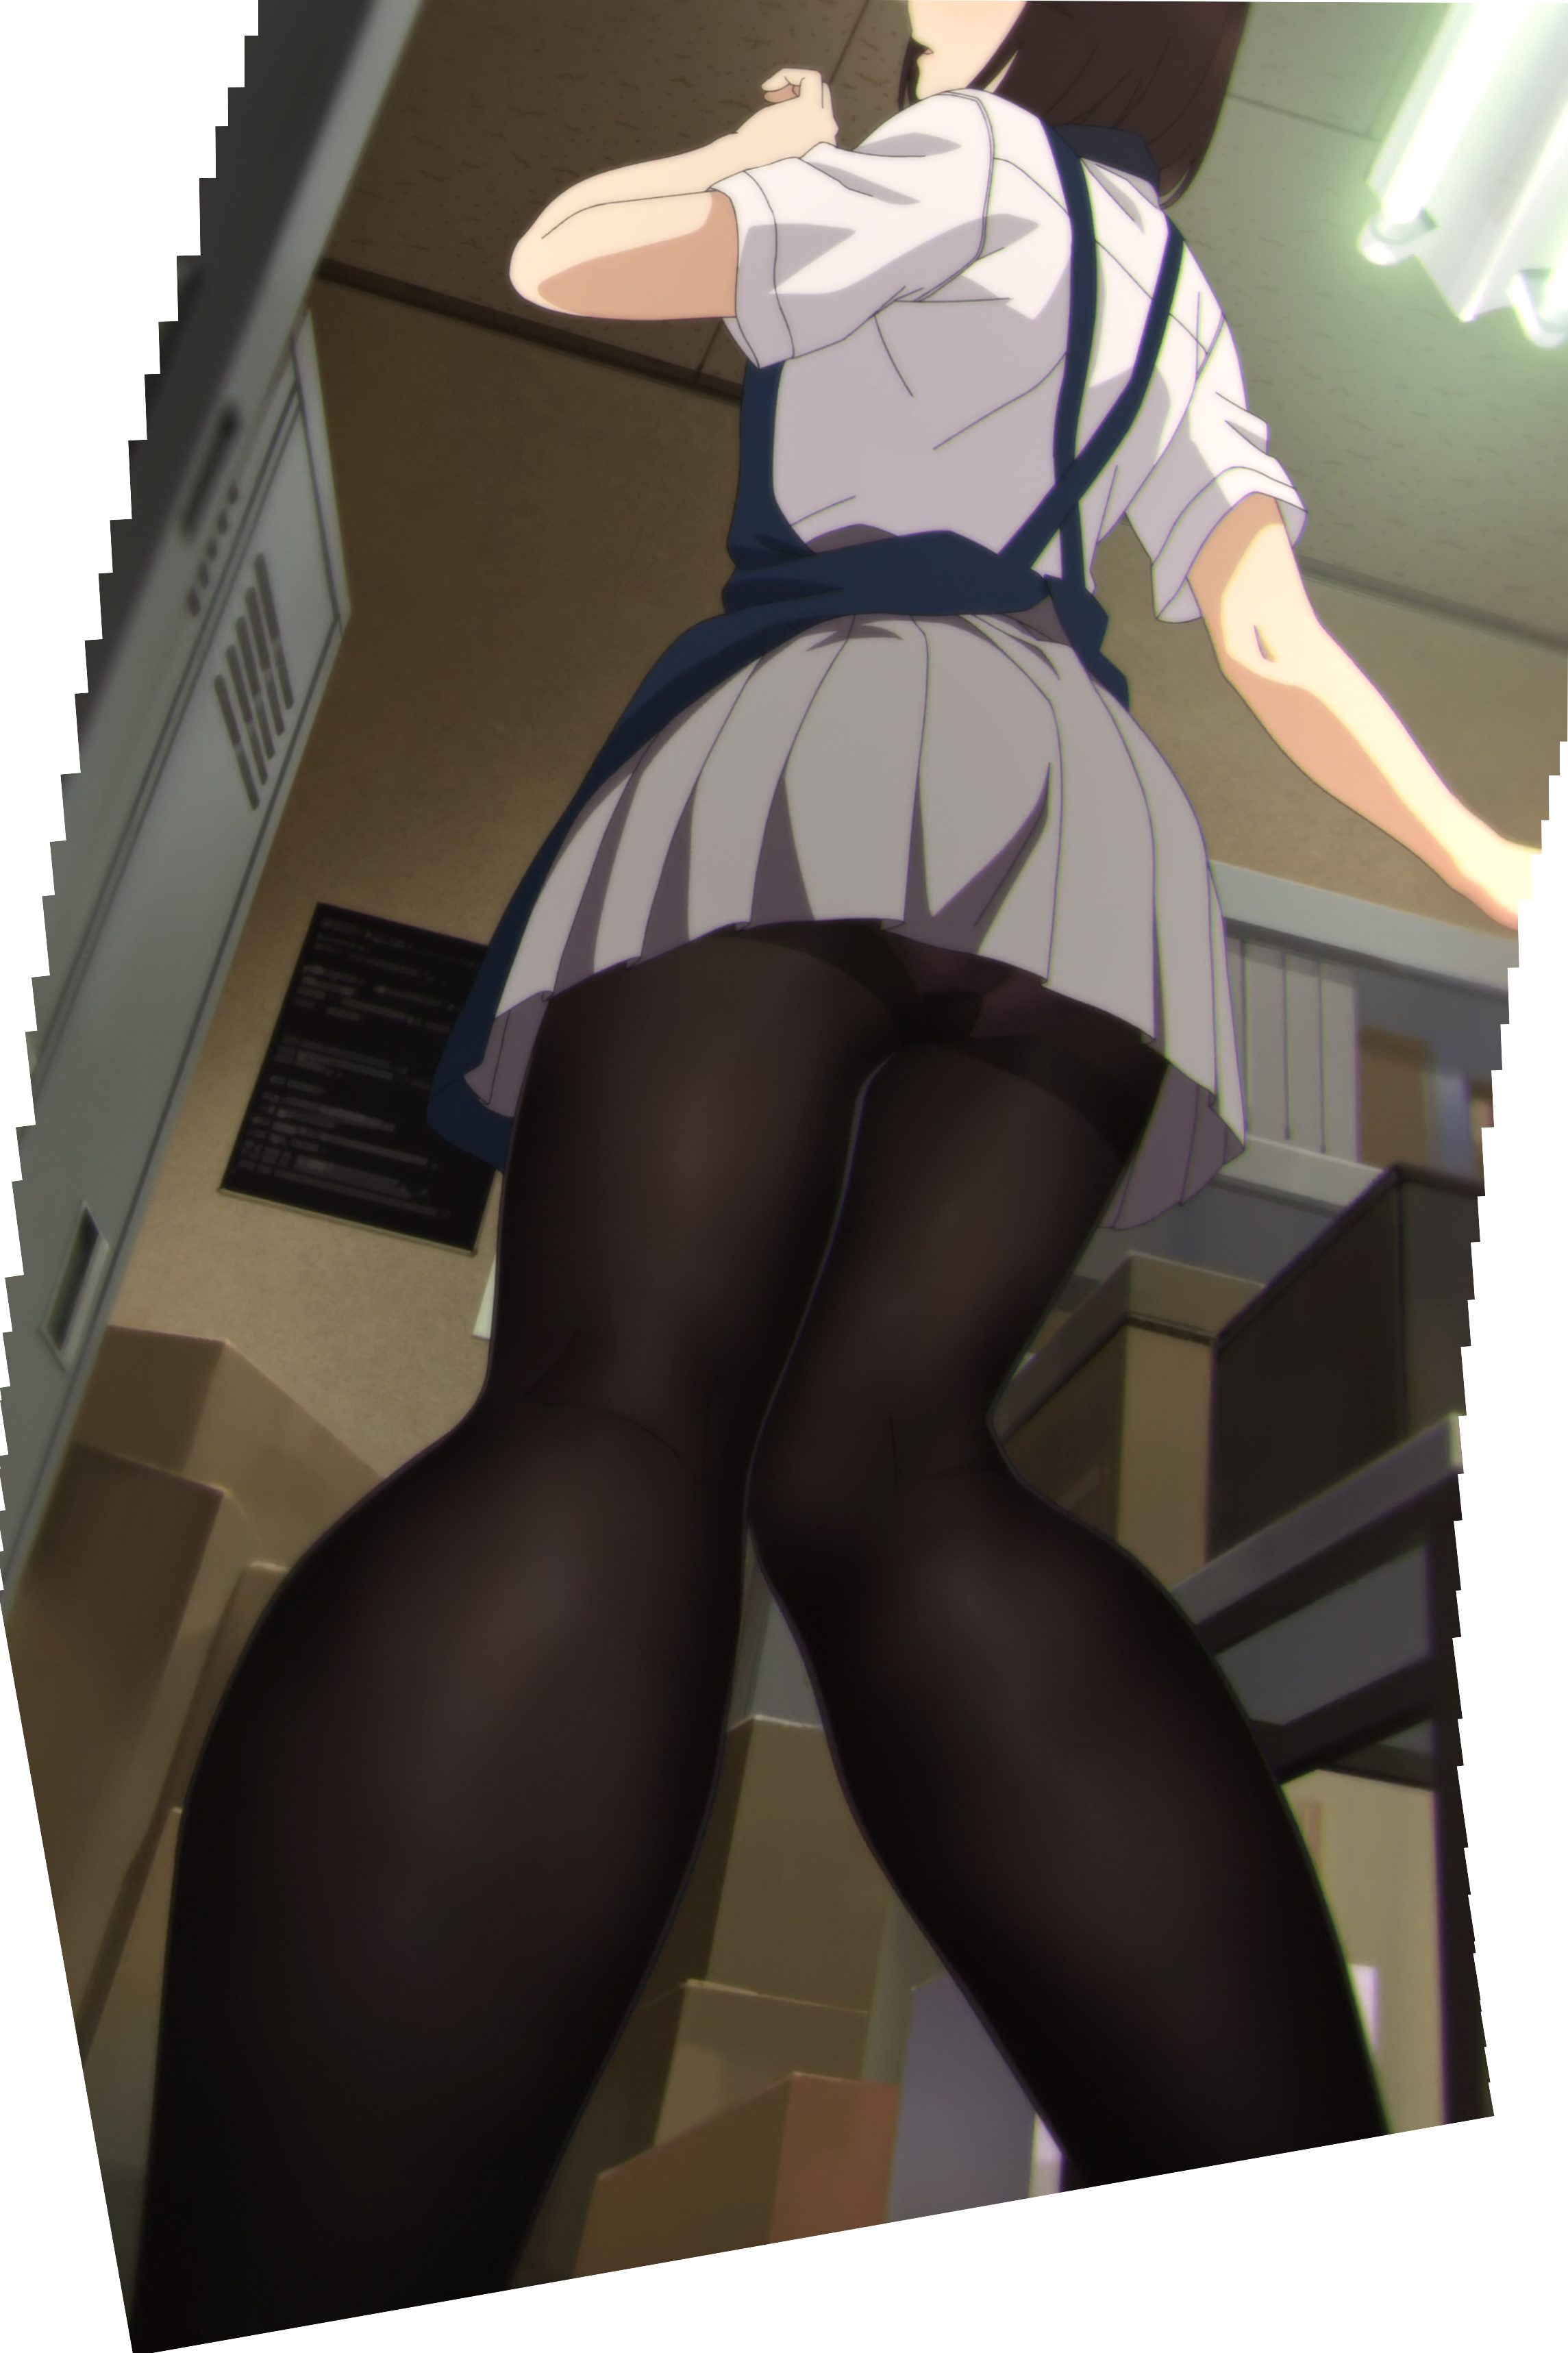 An Anime ALL ABOUT TIGHTS!